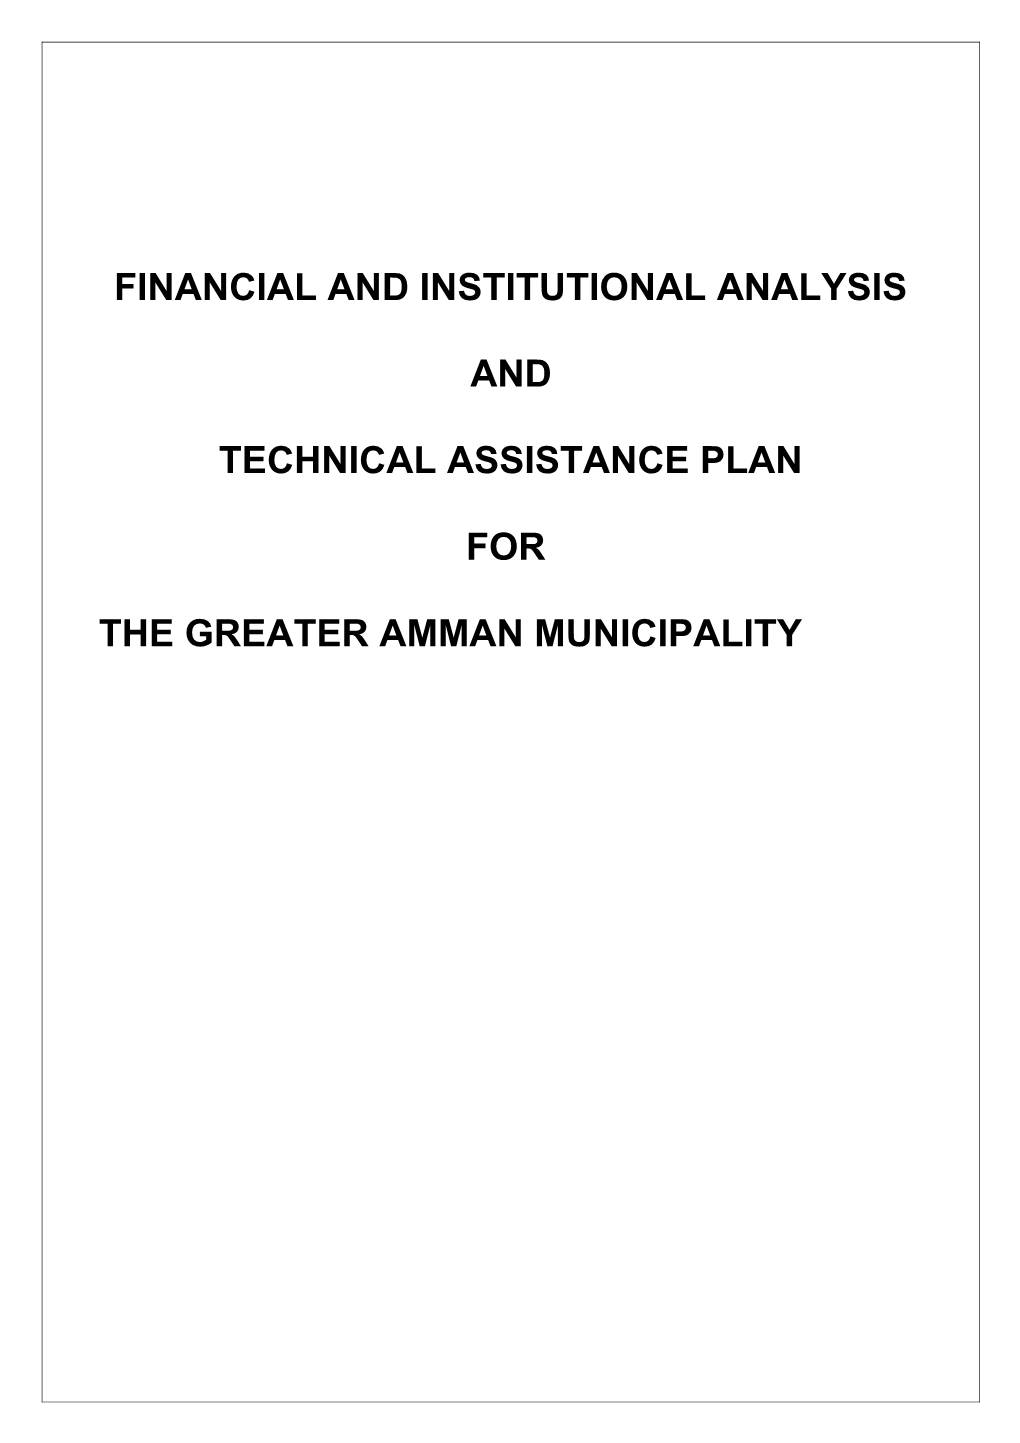 Financial and Institutional Analysis